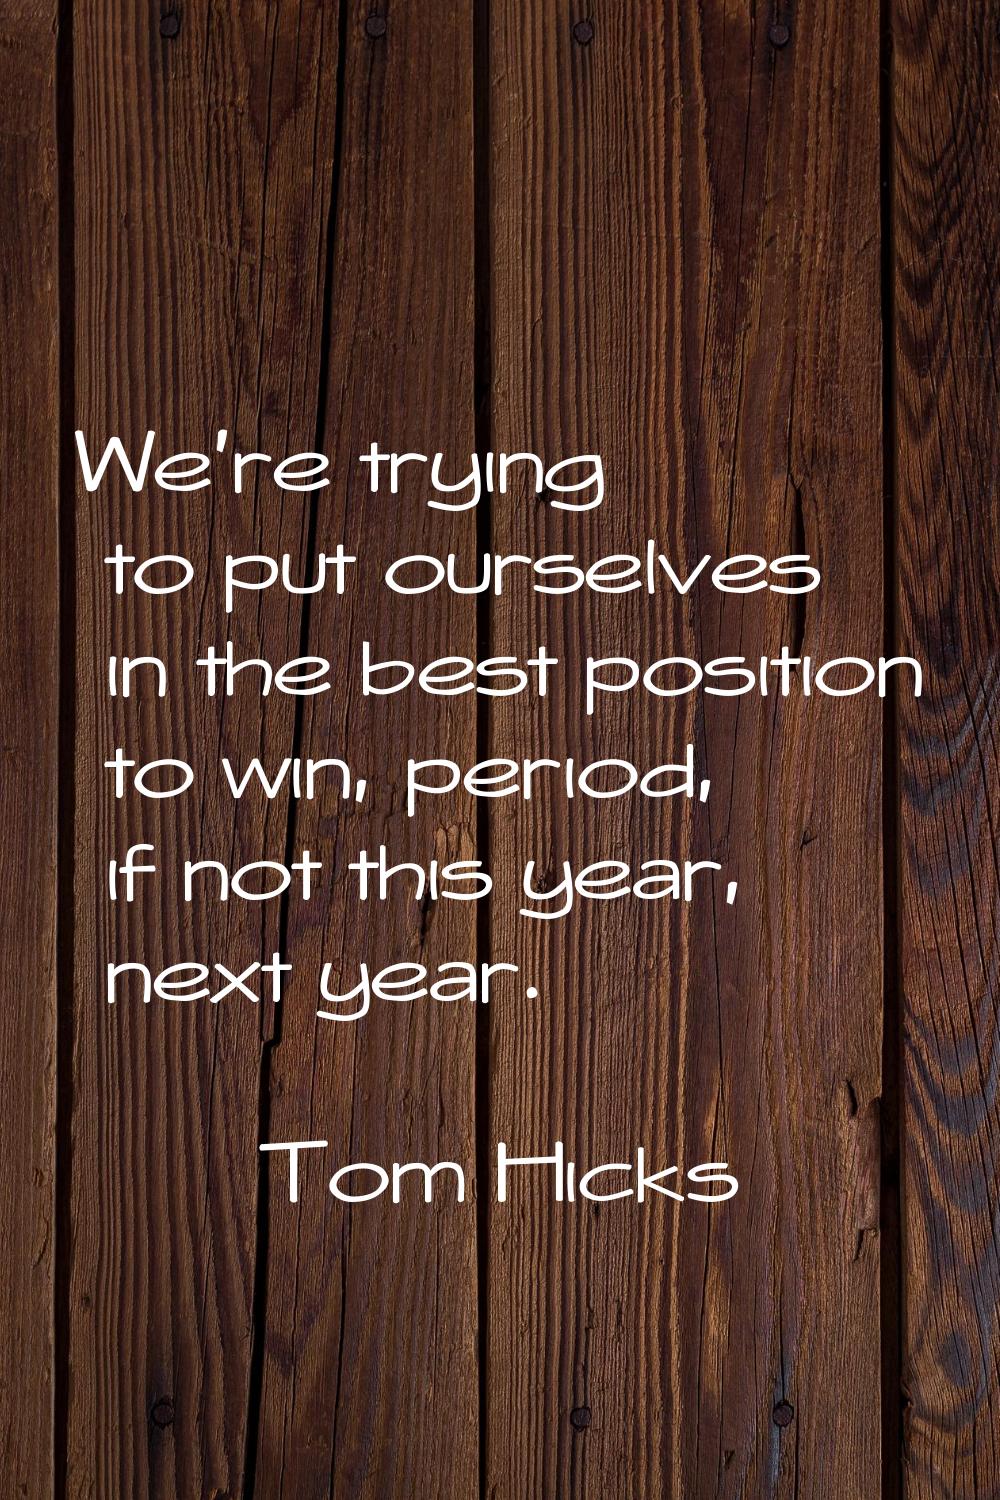 We're trying to put ourselves in the best position to win, period, if not this year, next year.